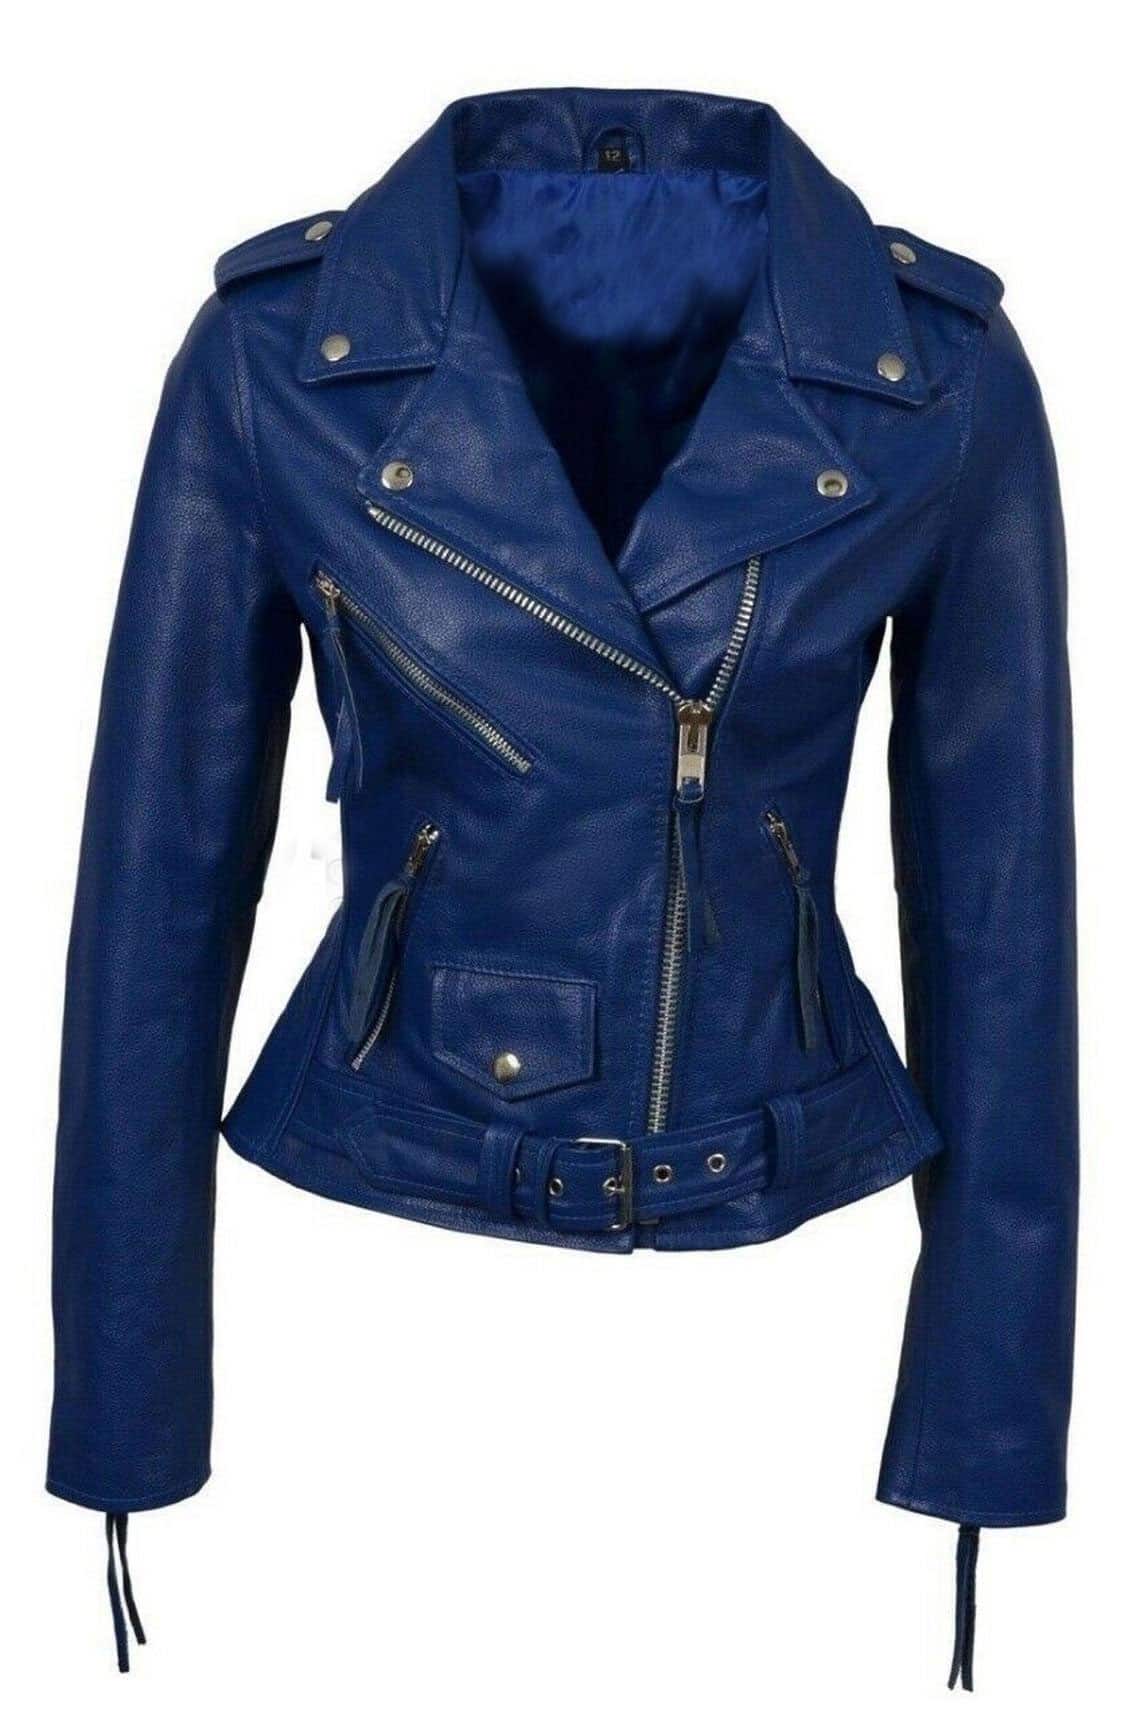 Blue Leather Jacket. When wearing a leather jacket, every… | by Heber ...